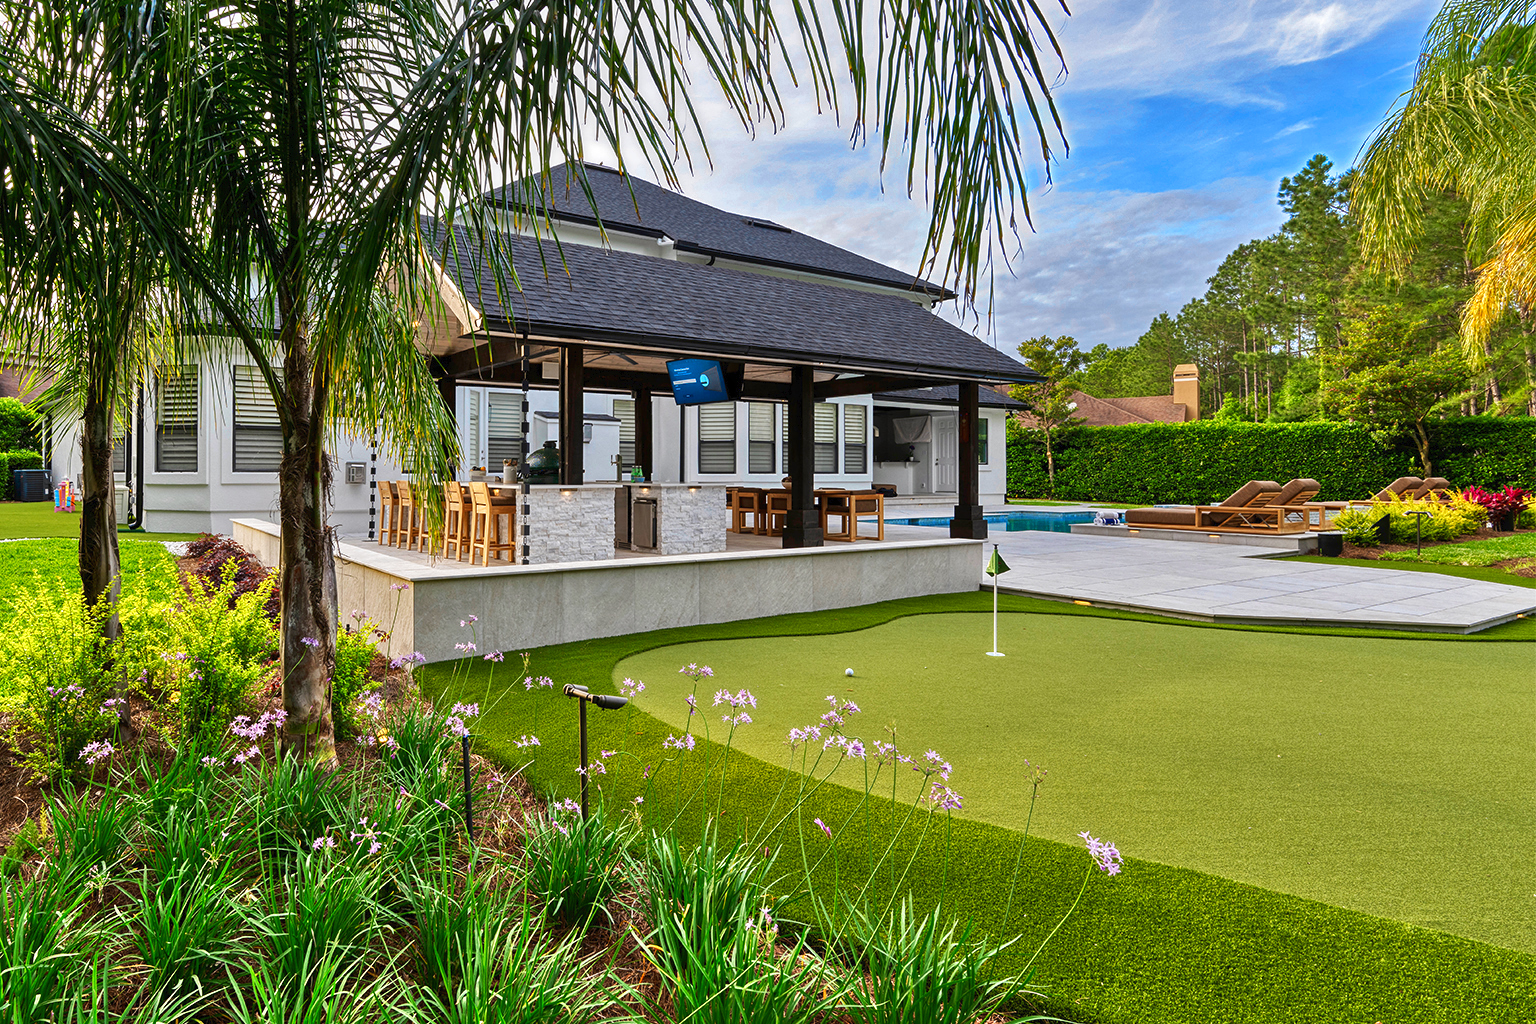 Luxury Outdoor Living | Featured image for “Sip’n Relax” Jacksonville, FL